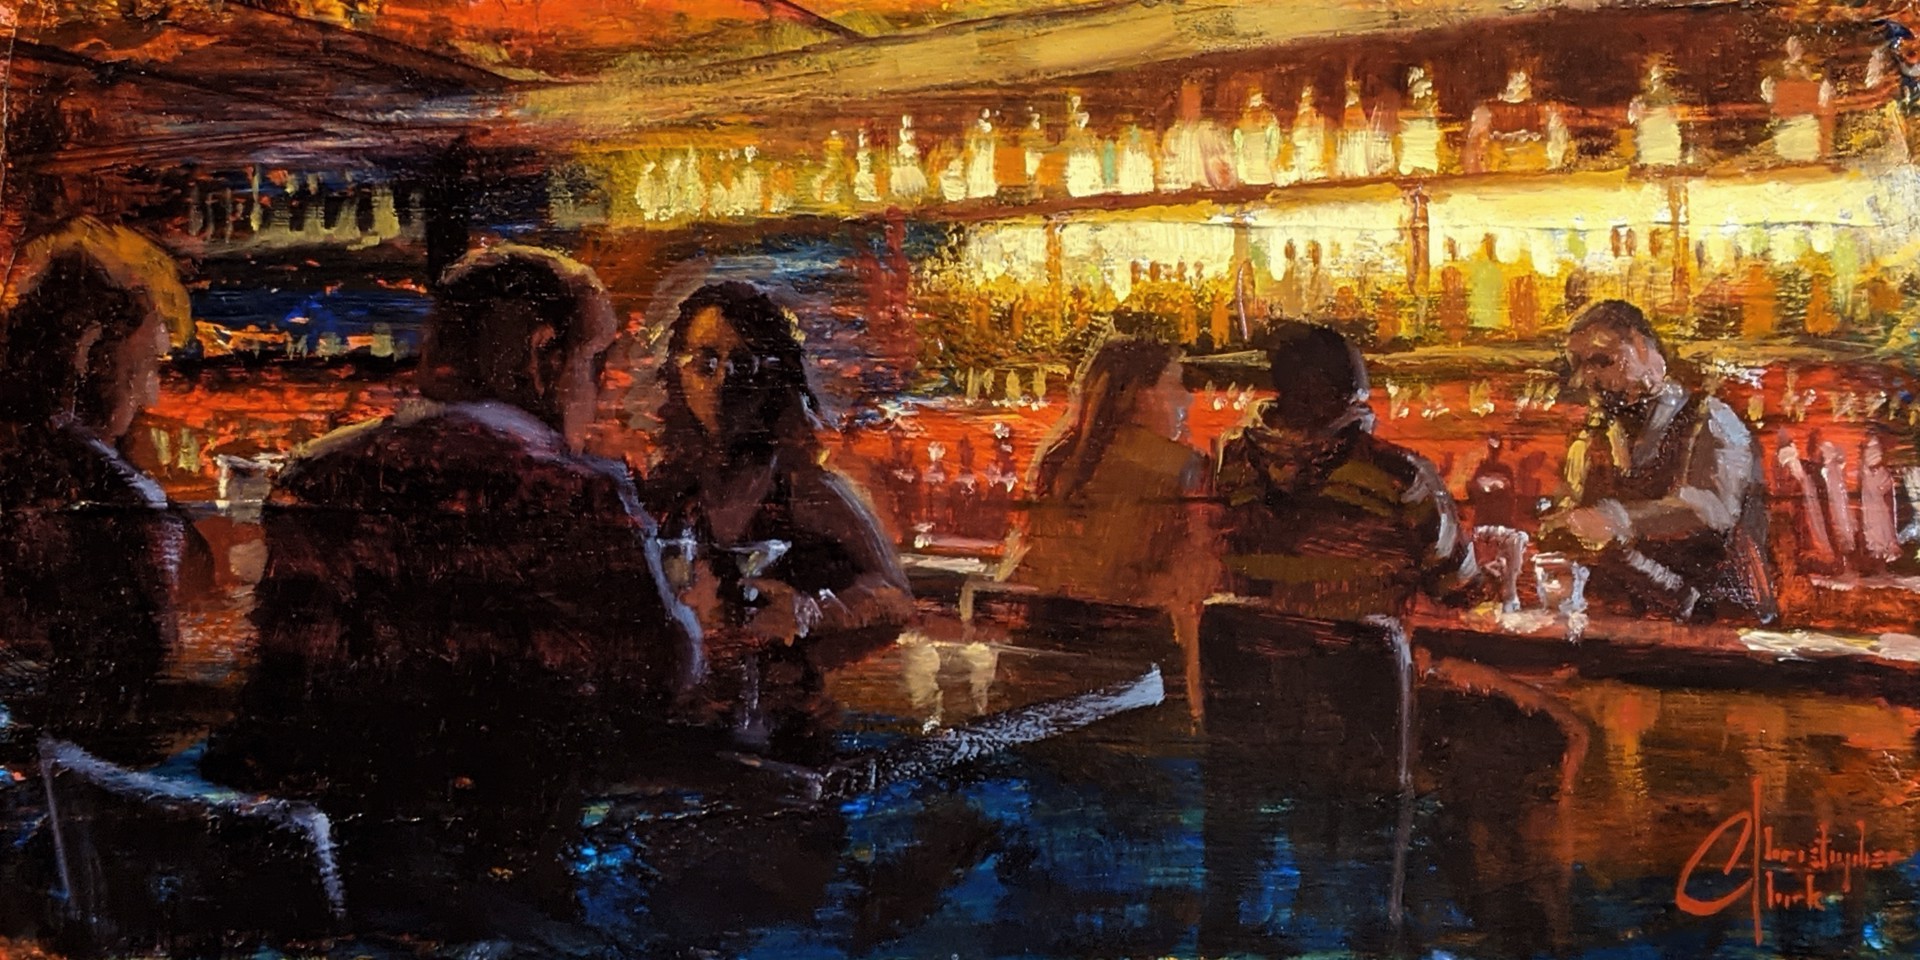 Meeting Friends at the Bar by Christopher Clark